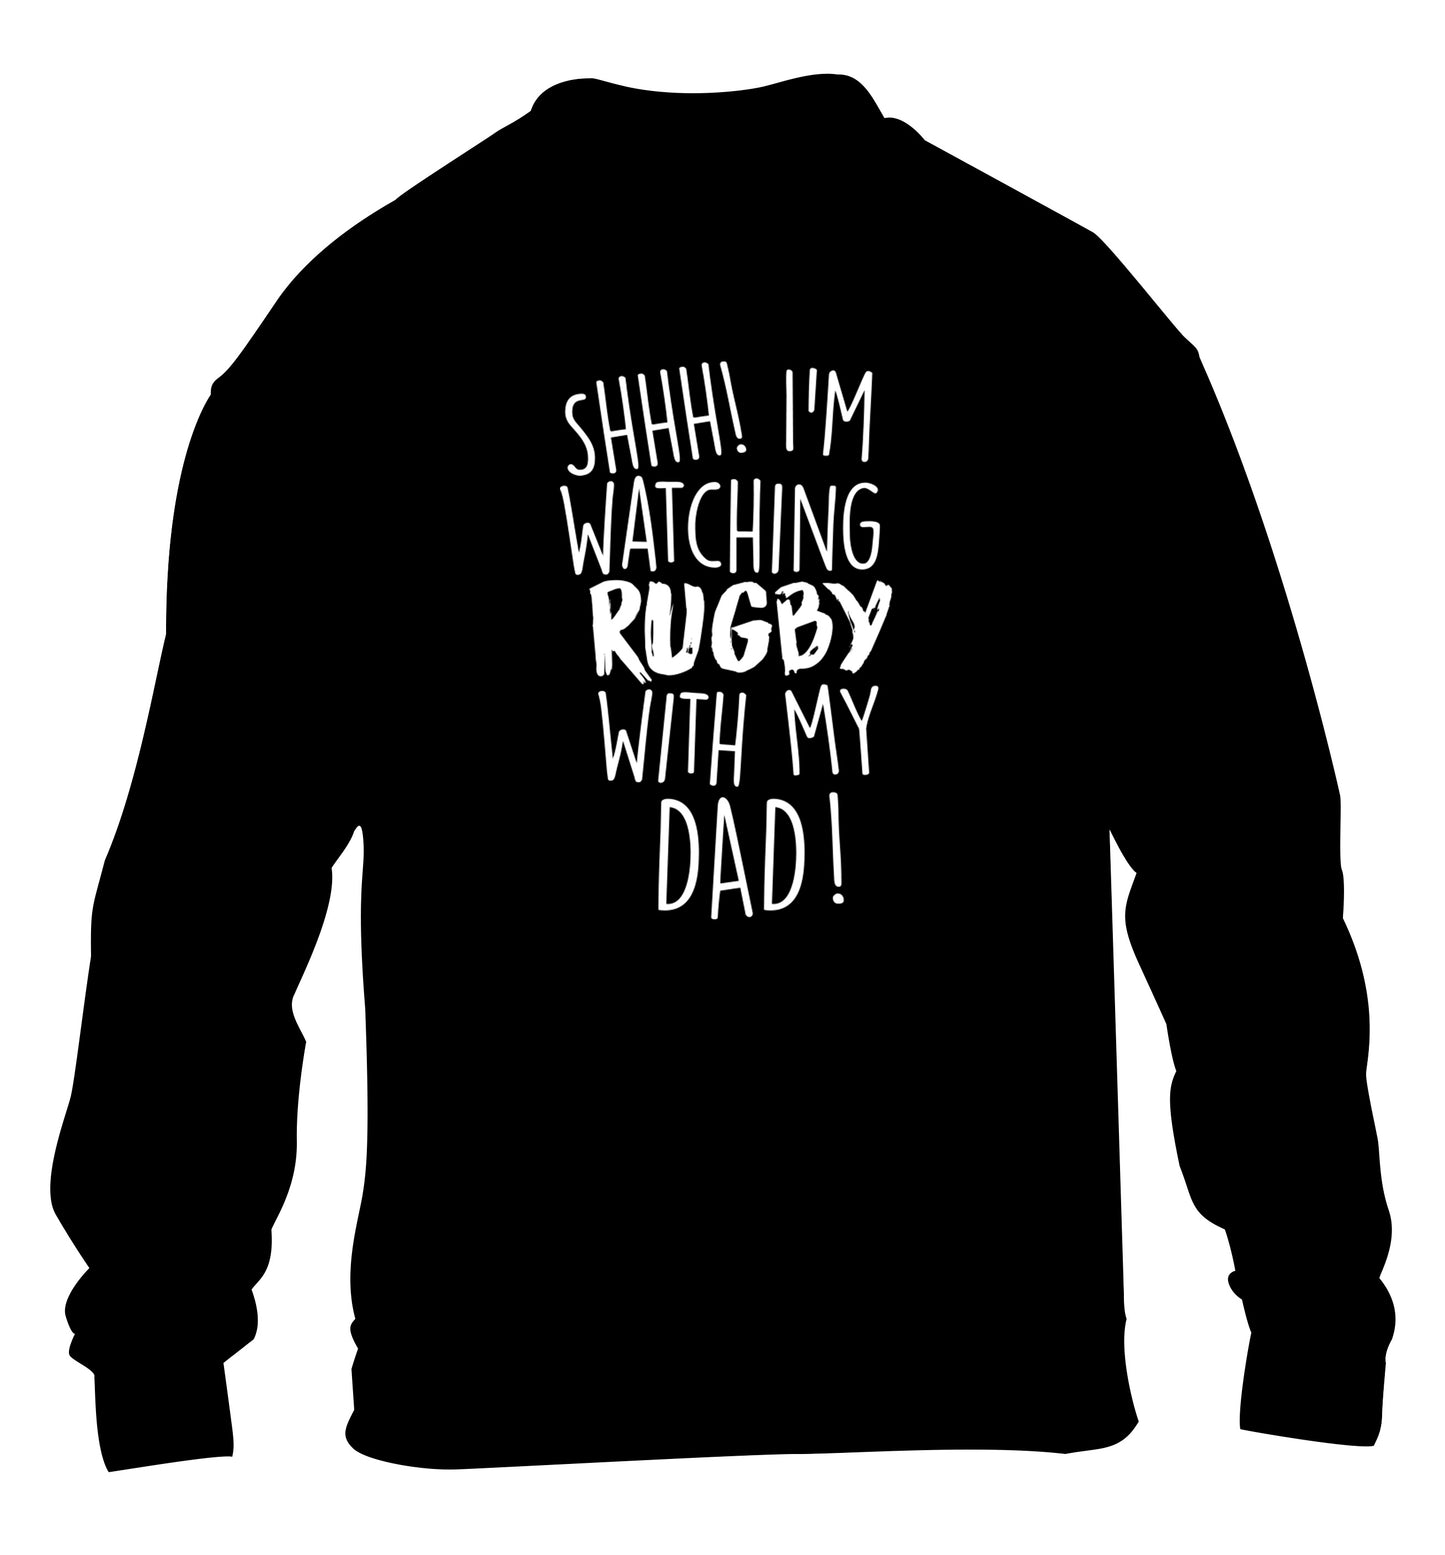 Shh... I'm watching rugby with my dad children's black sweater 12-13 Years